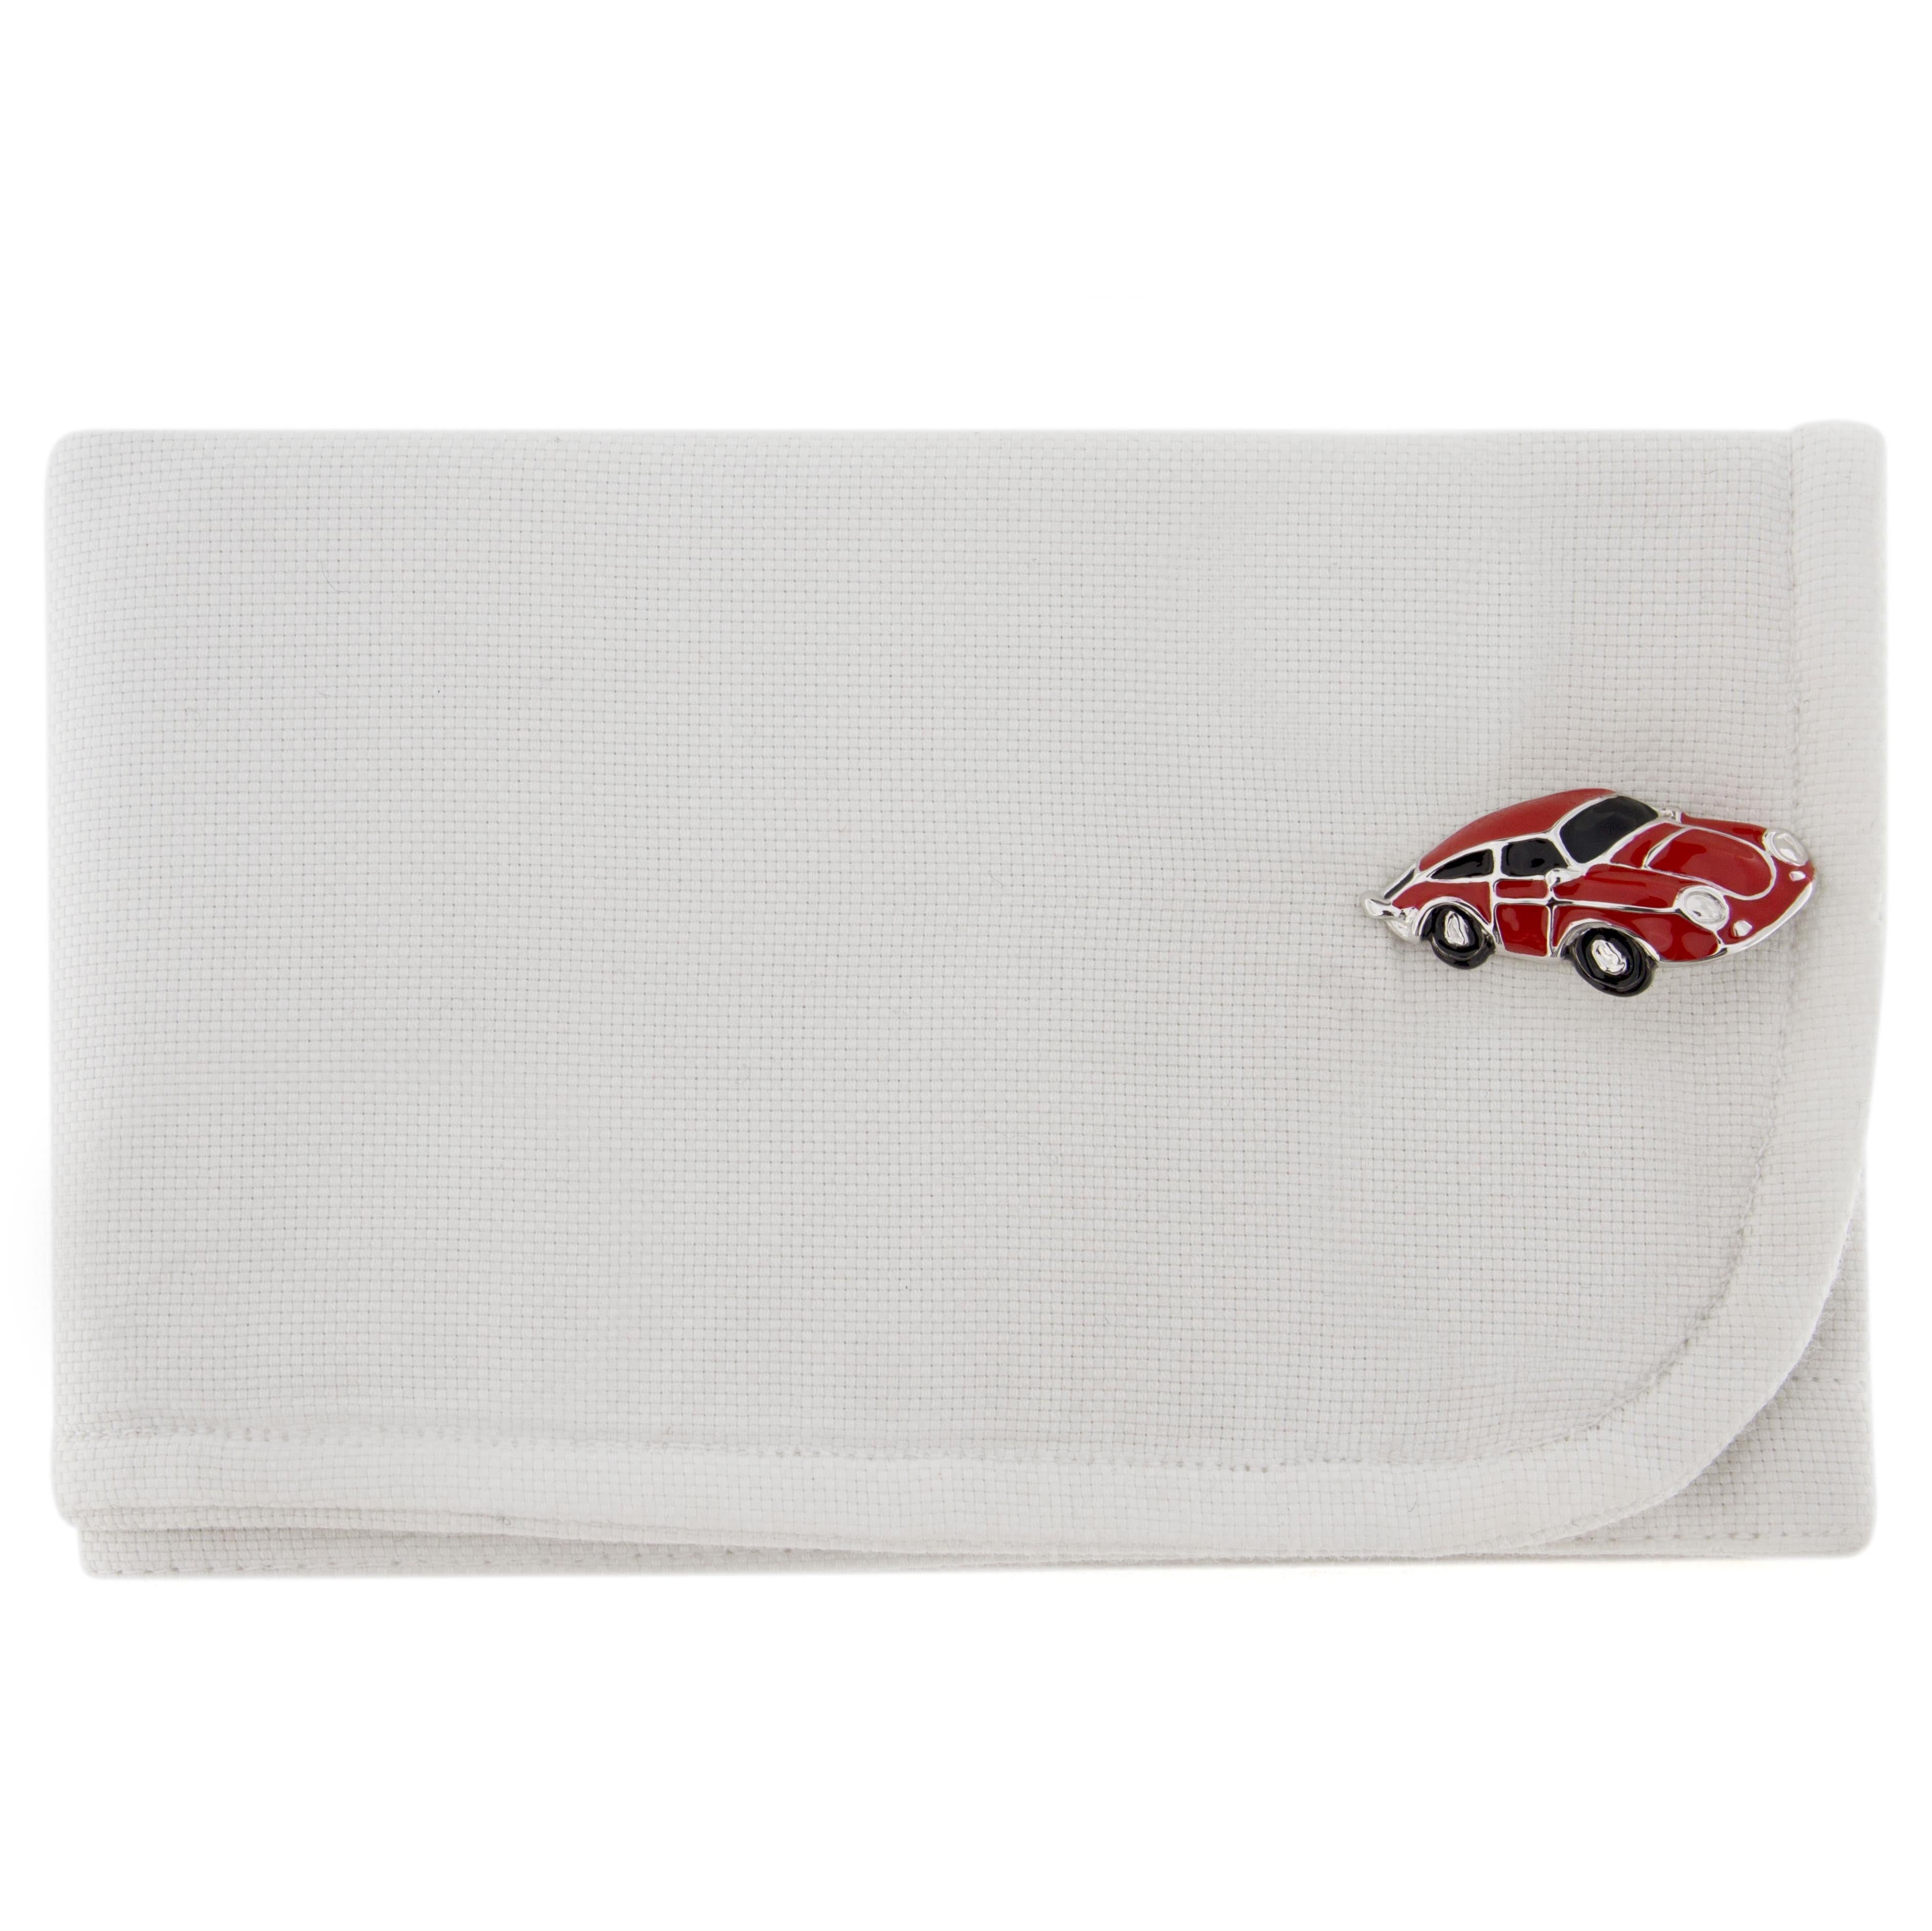 Jona design collection, hand crafted in Italy, Rhodium plated sterling silver Porsche Cufflinks with red enamel. Dimension: L 1.10 in x W 0.55 in - L 28 mm x W 14.20 mm
All Jona jewelry is new and has never been previously owned or worn. Each item